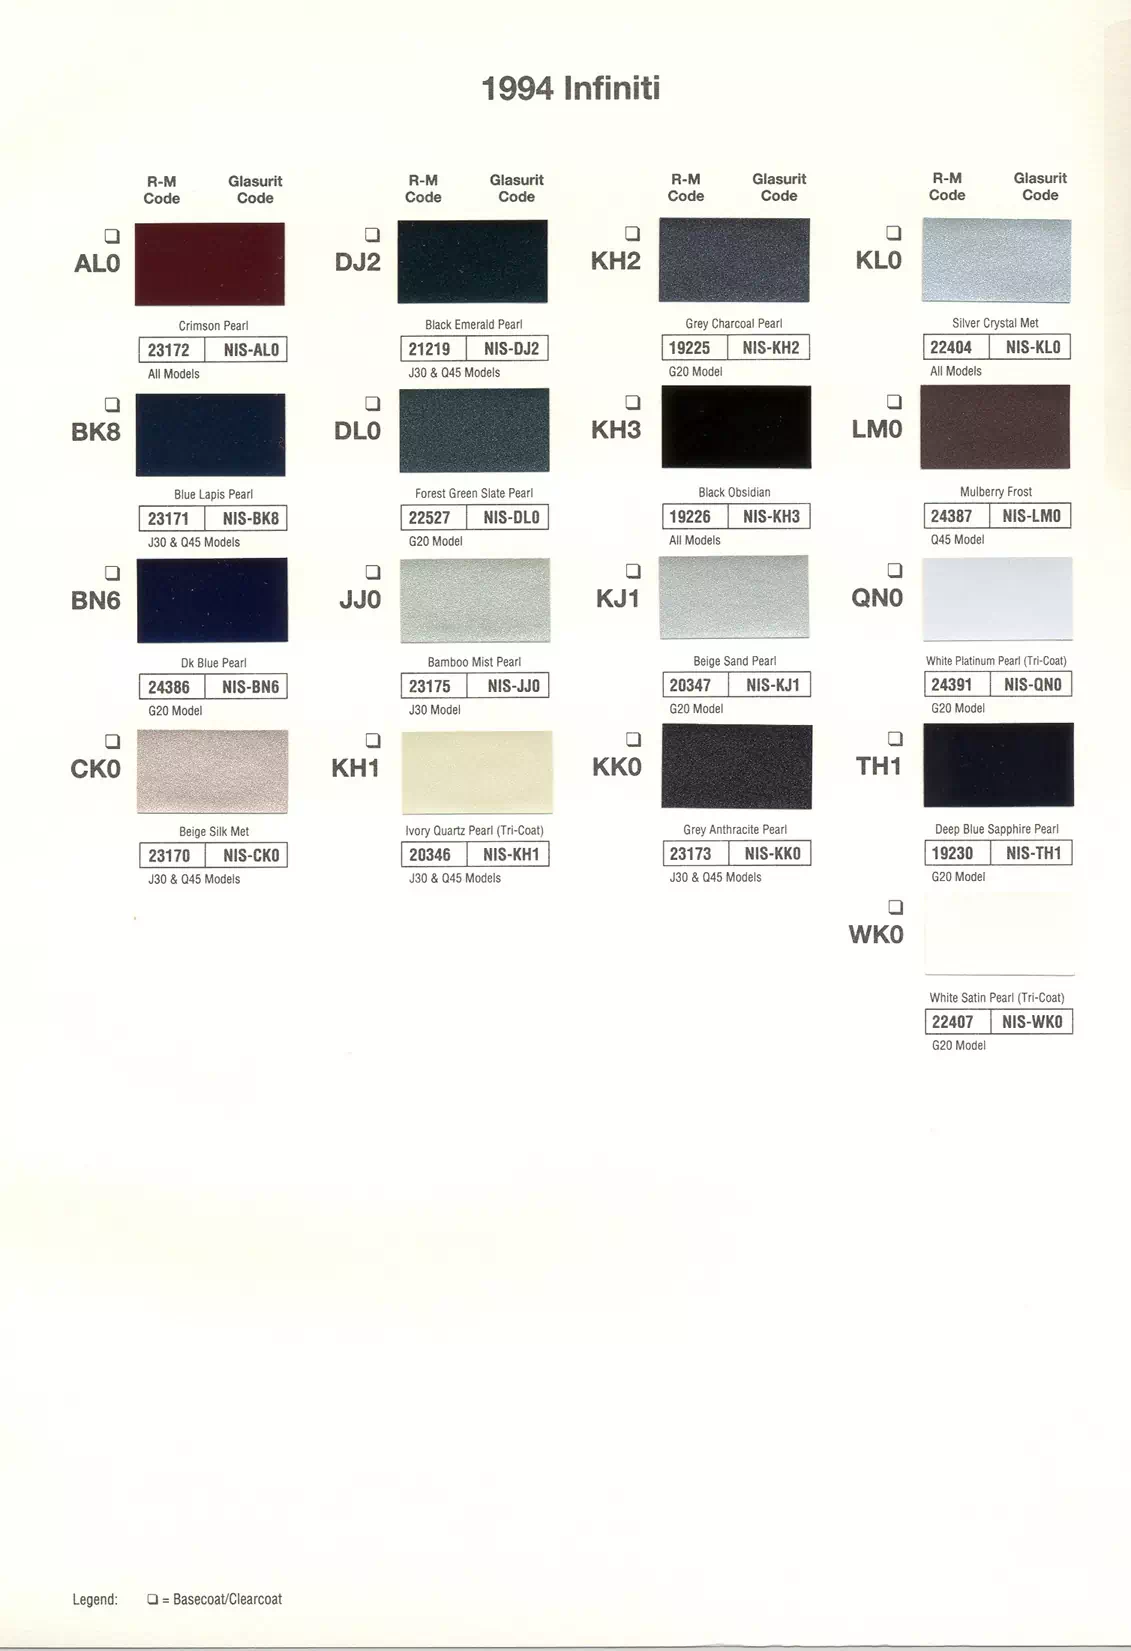 Exterior paint colors for Nissan and Infiniti vehicles and their ordering codes and stock numbers